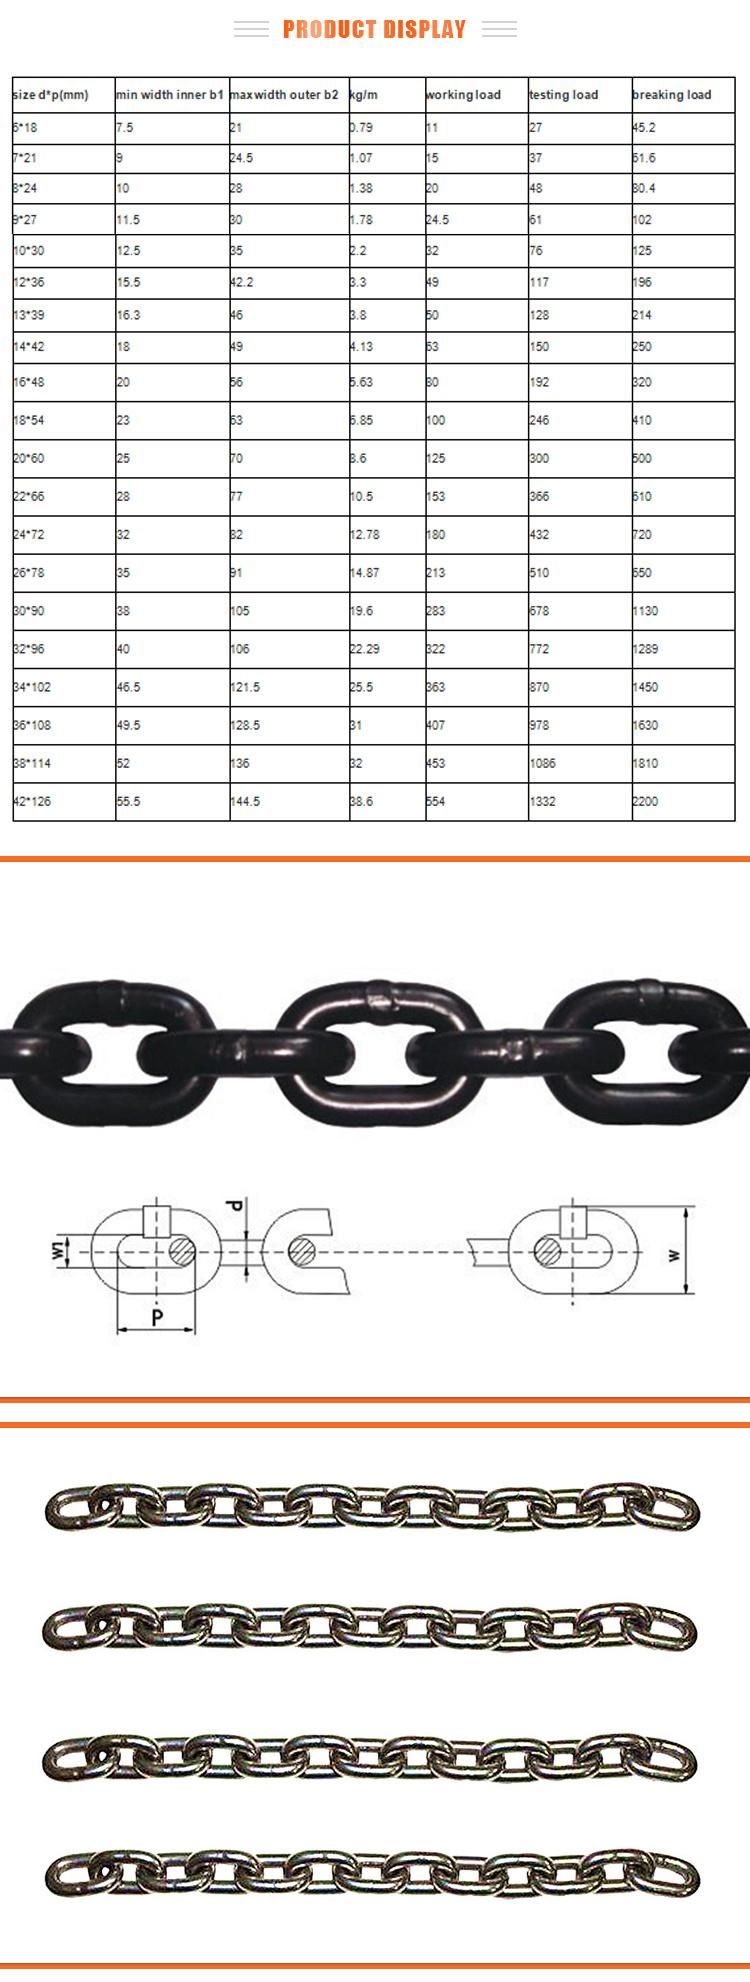 High Quality 1- 10 Ton Material Pulling Building Motor Lifting Construction Crane Wire Rope Electric Chain Hoist for Car Mining